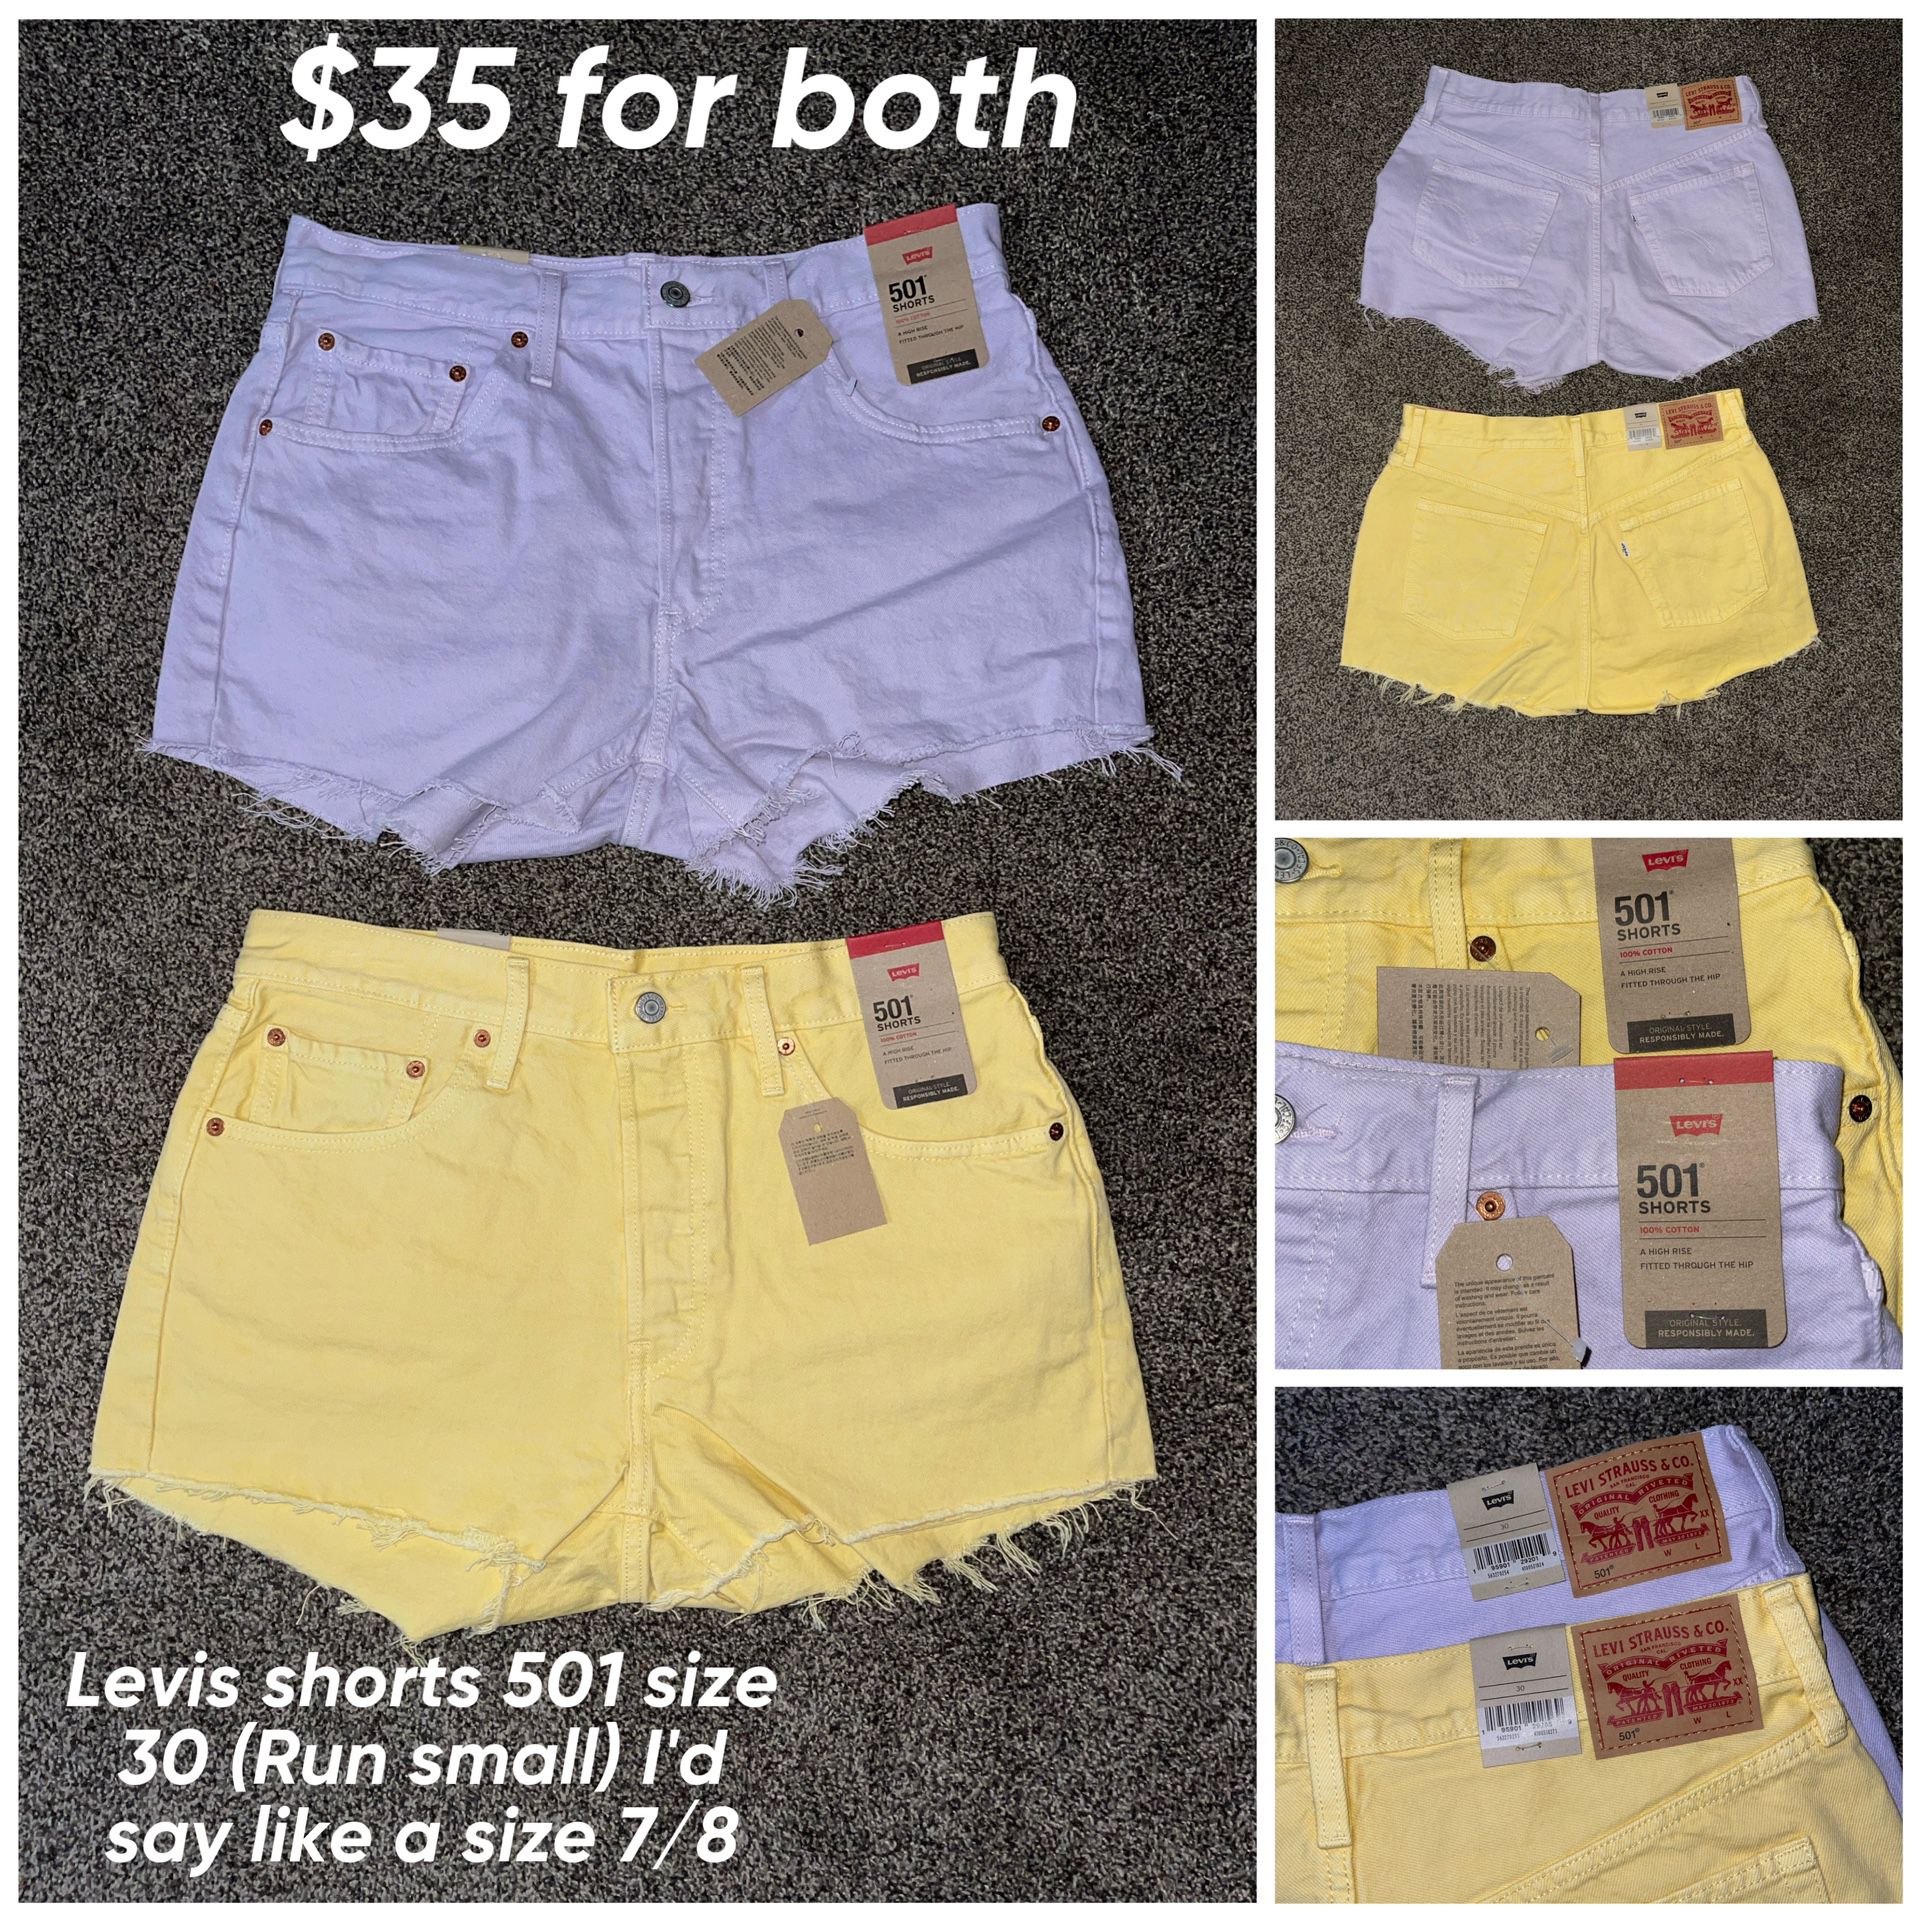 501 Levi's Shorts Size 30 $35 For Both for Sale in Bakersfield, CA - OfferUp